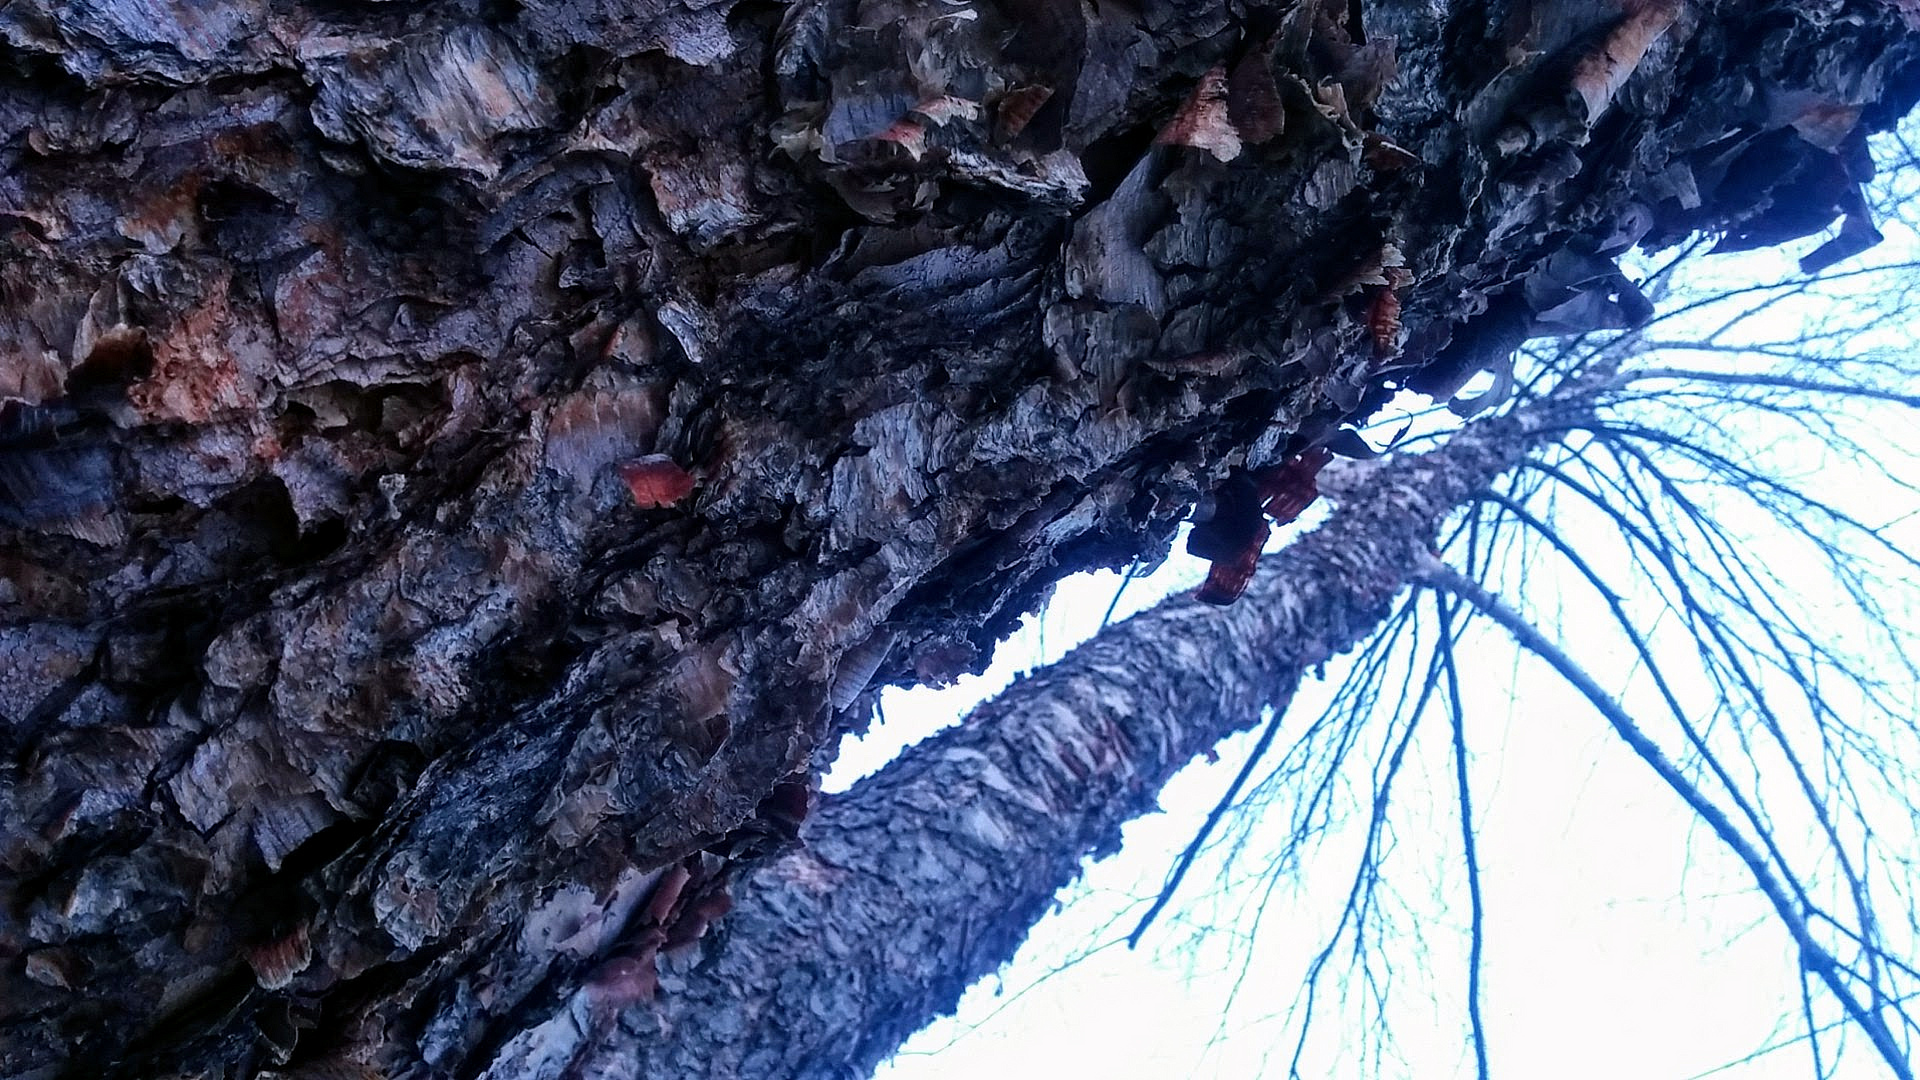 Looking up at tall birch trees with peeling barks. Photo taken in Winter, so there are no leaves on the branches. The landscape layout of the photo is divided approximately by the diagonal from the lower left corner to the upper right corner. The area above the diagonal has the close-up of the peeling bark of a birch. Under the diagonal is another similar birch, in the background, with branches near its top.